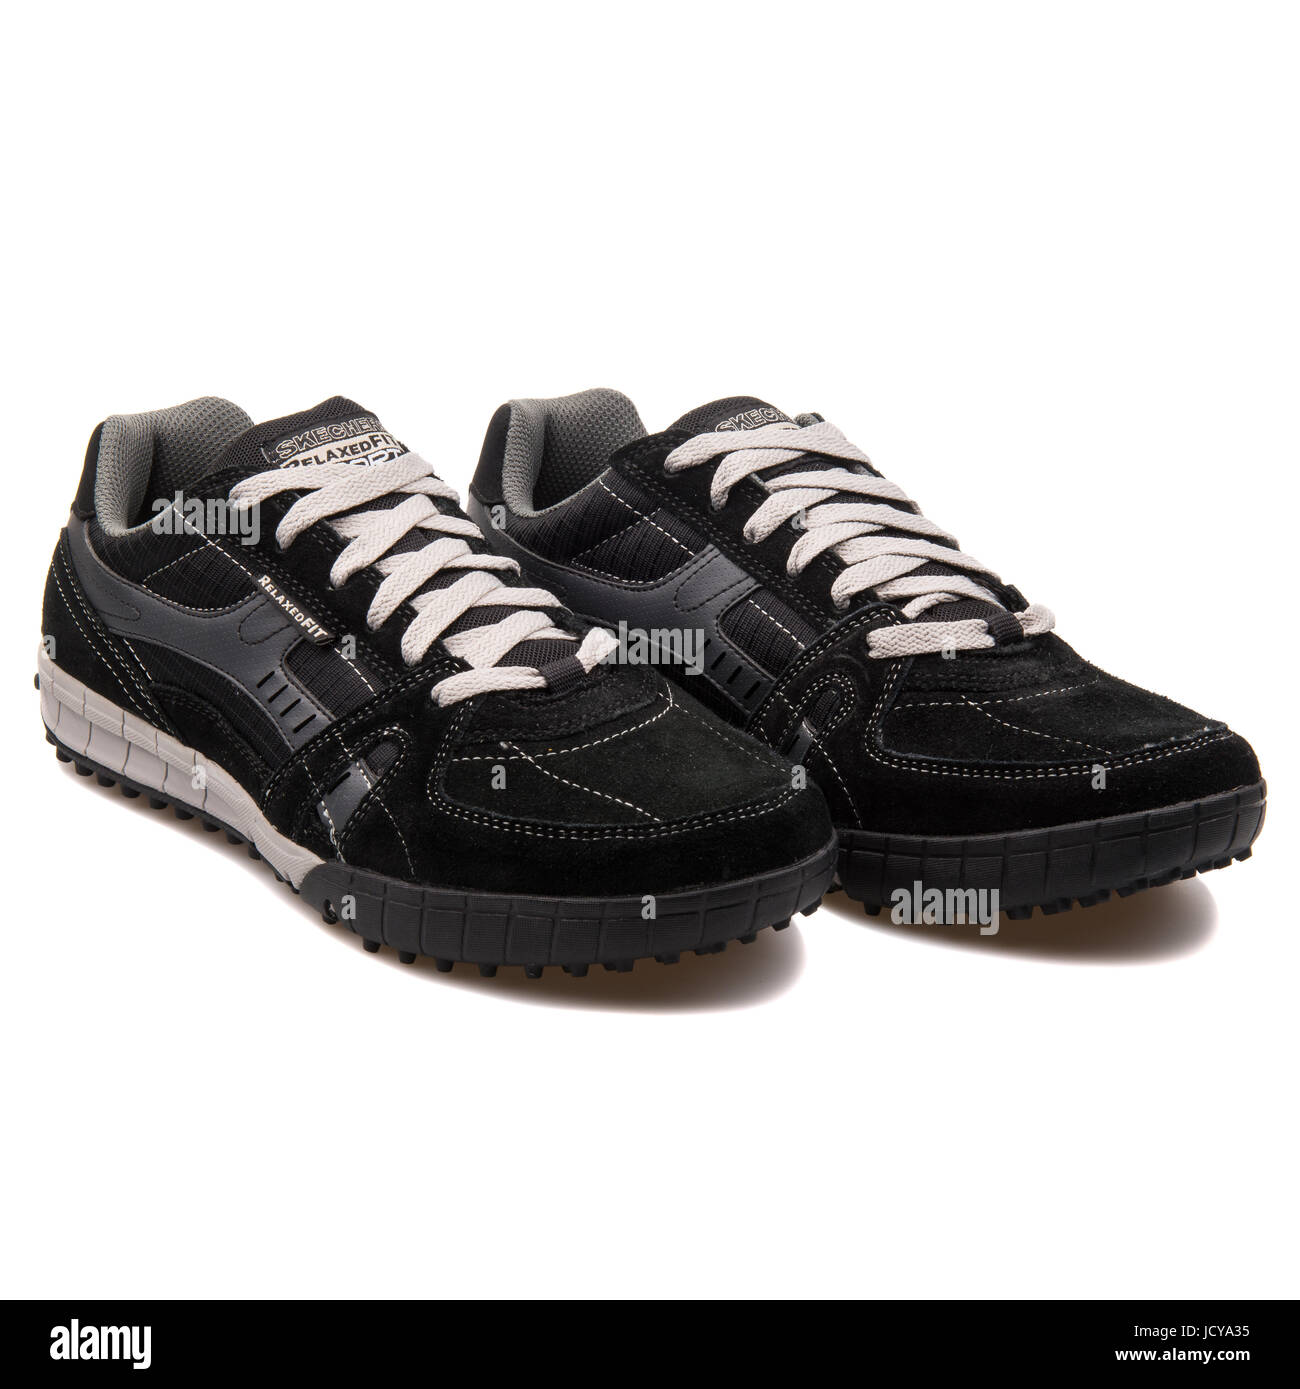 Sneakers - 51328-BKGY Stock Photo 